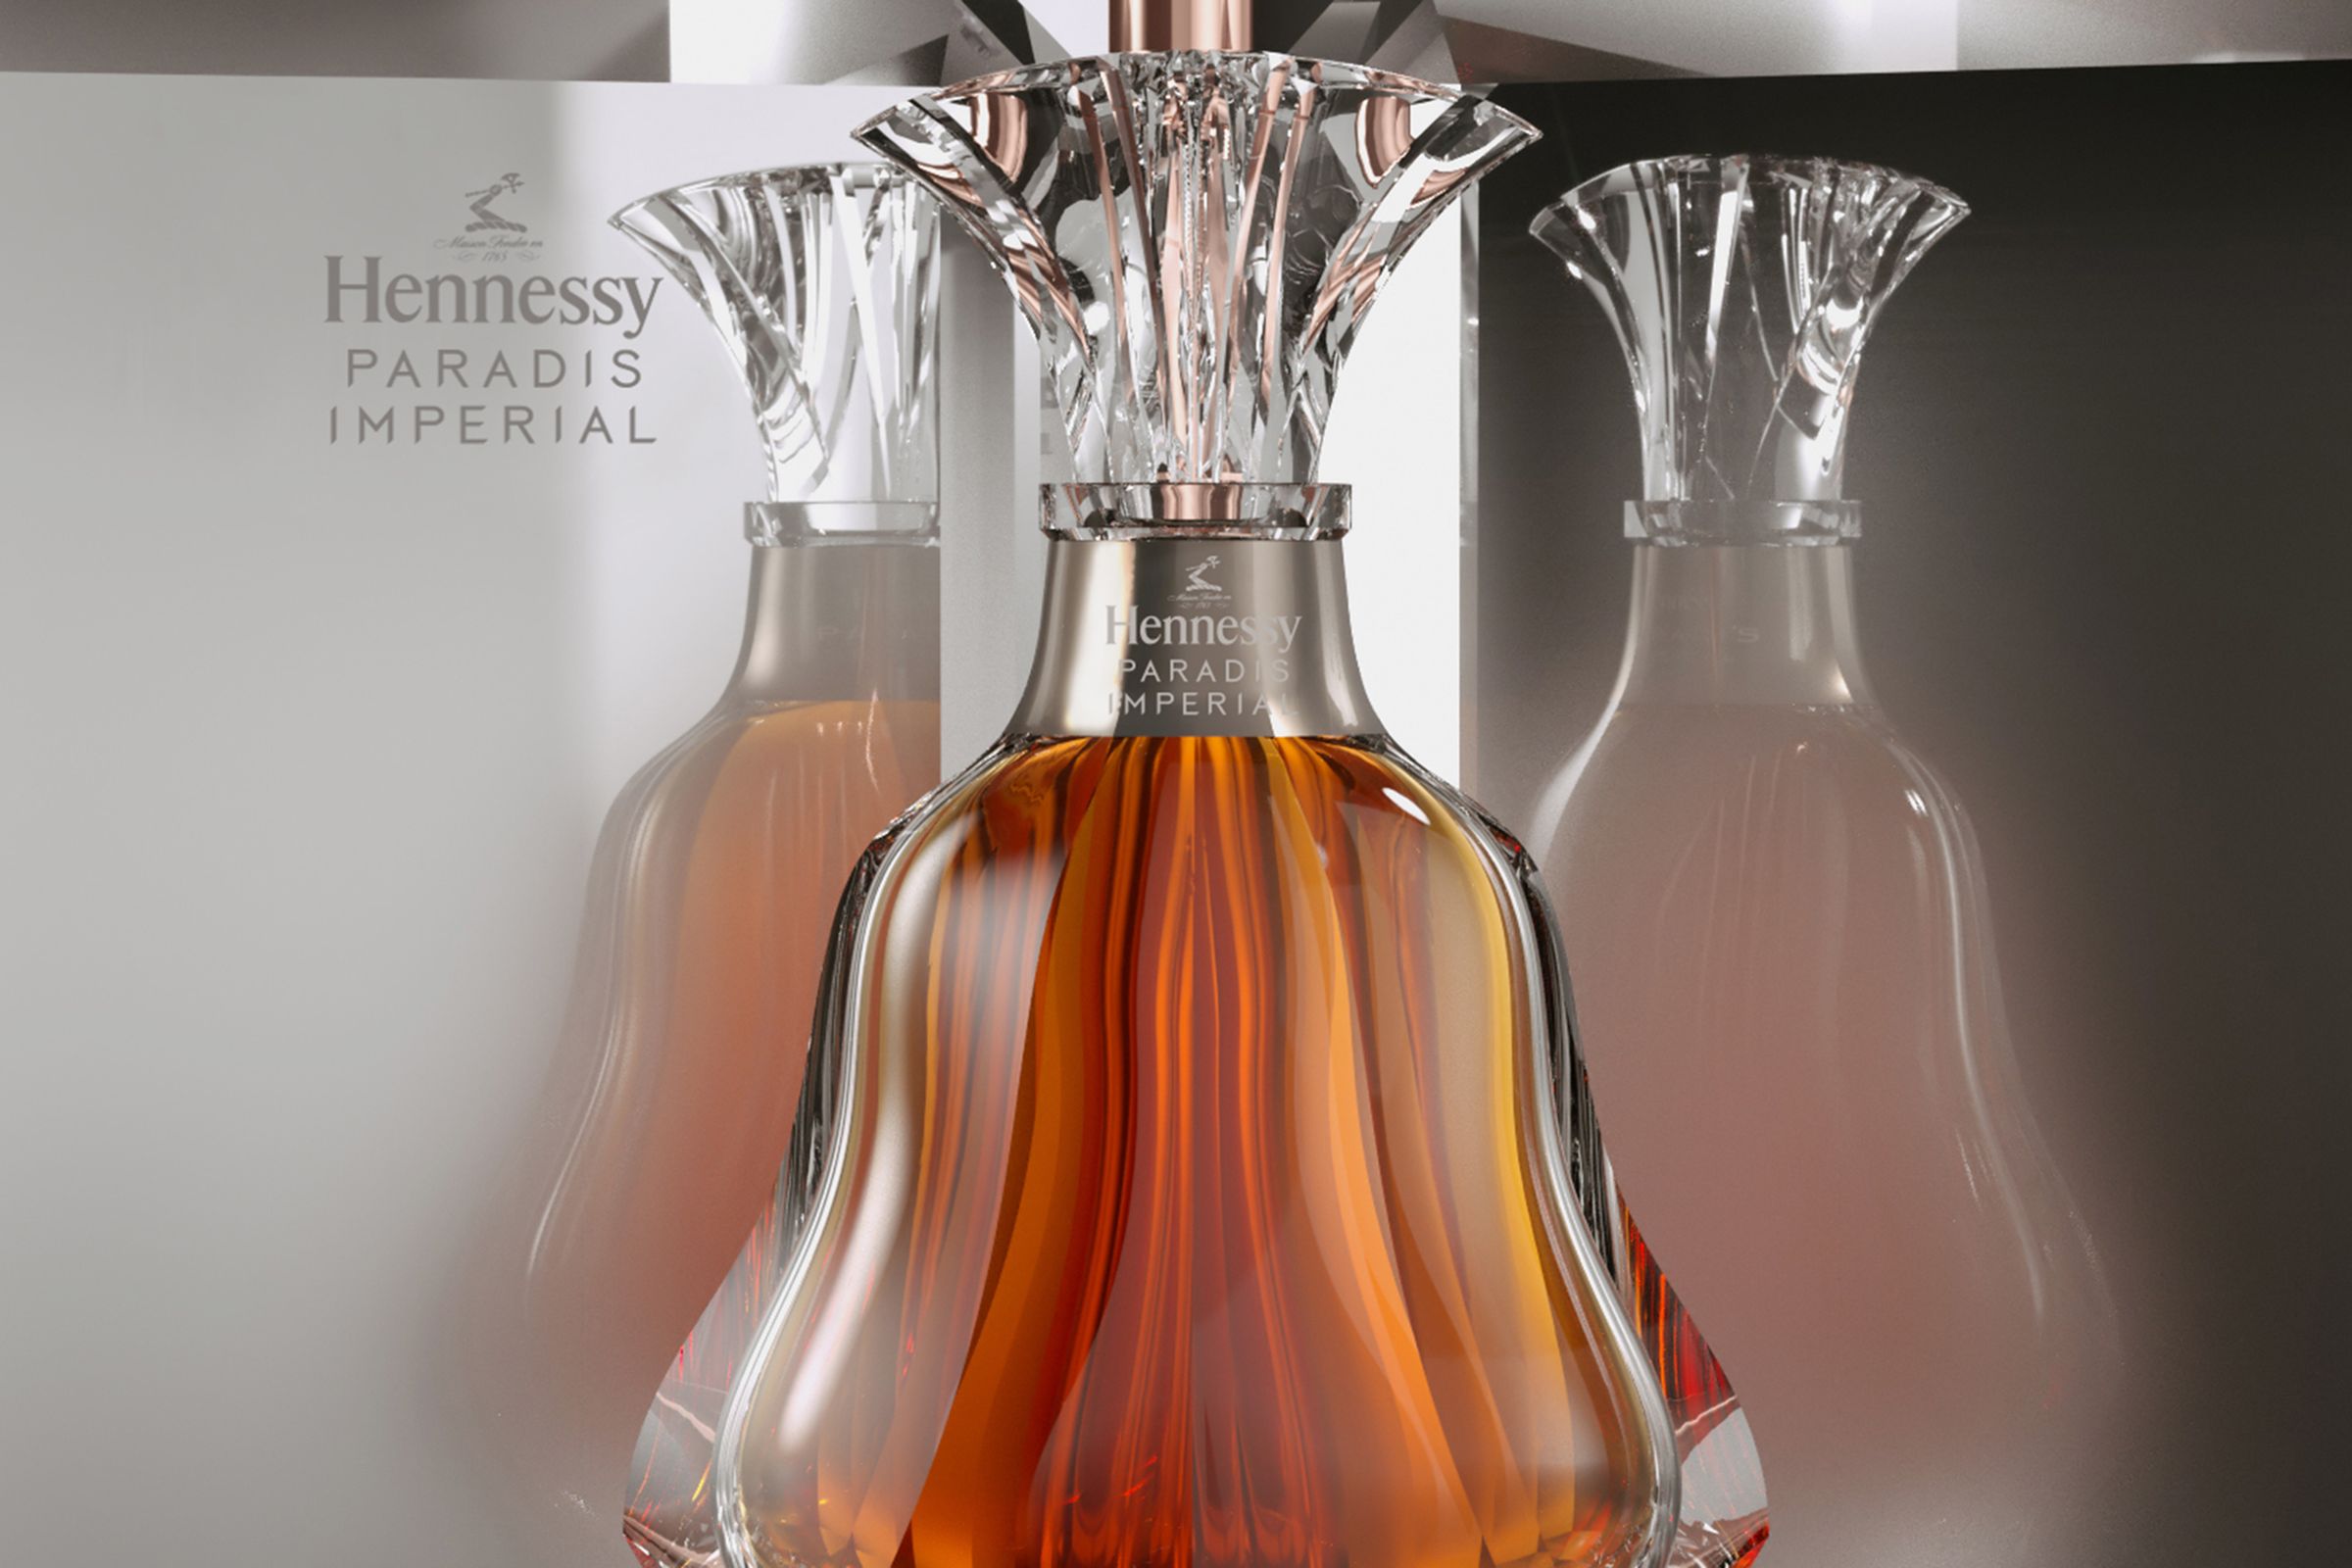 Hennessy products — NR2154